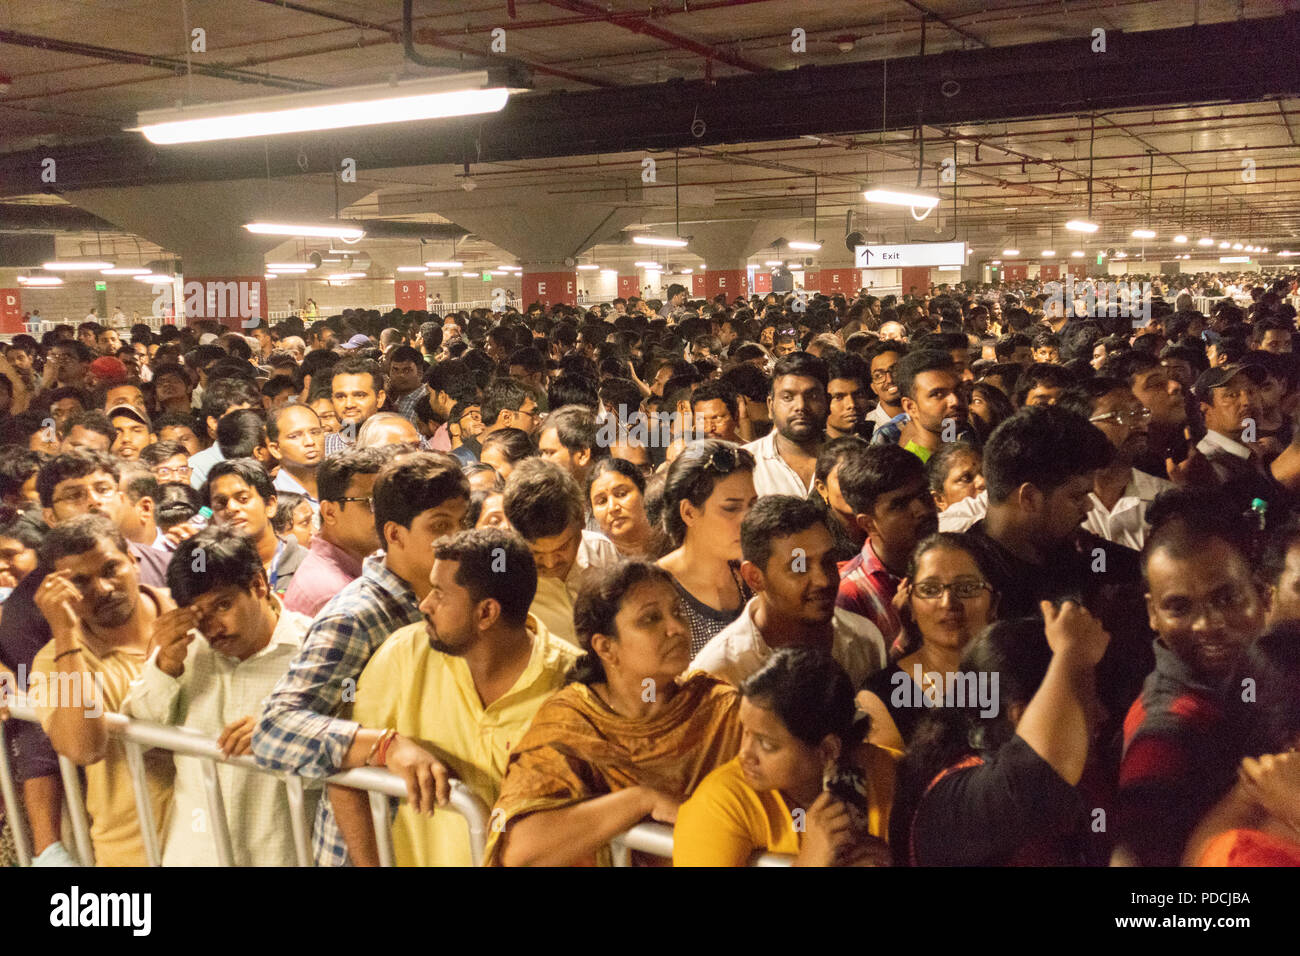 Hyderabad,India. 09th August,2018.People wait in line to enter newly opened  Ikea store in Hyderabad,India.Staff let in 10-15 customers every few  minutes to prevent stampede.This is IKEA's first store in India.Credit:  Sanjay Borra/Alamy